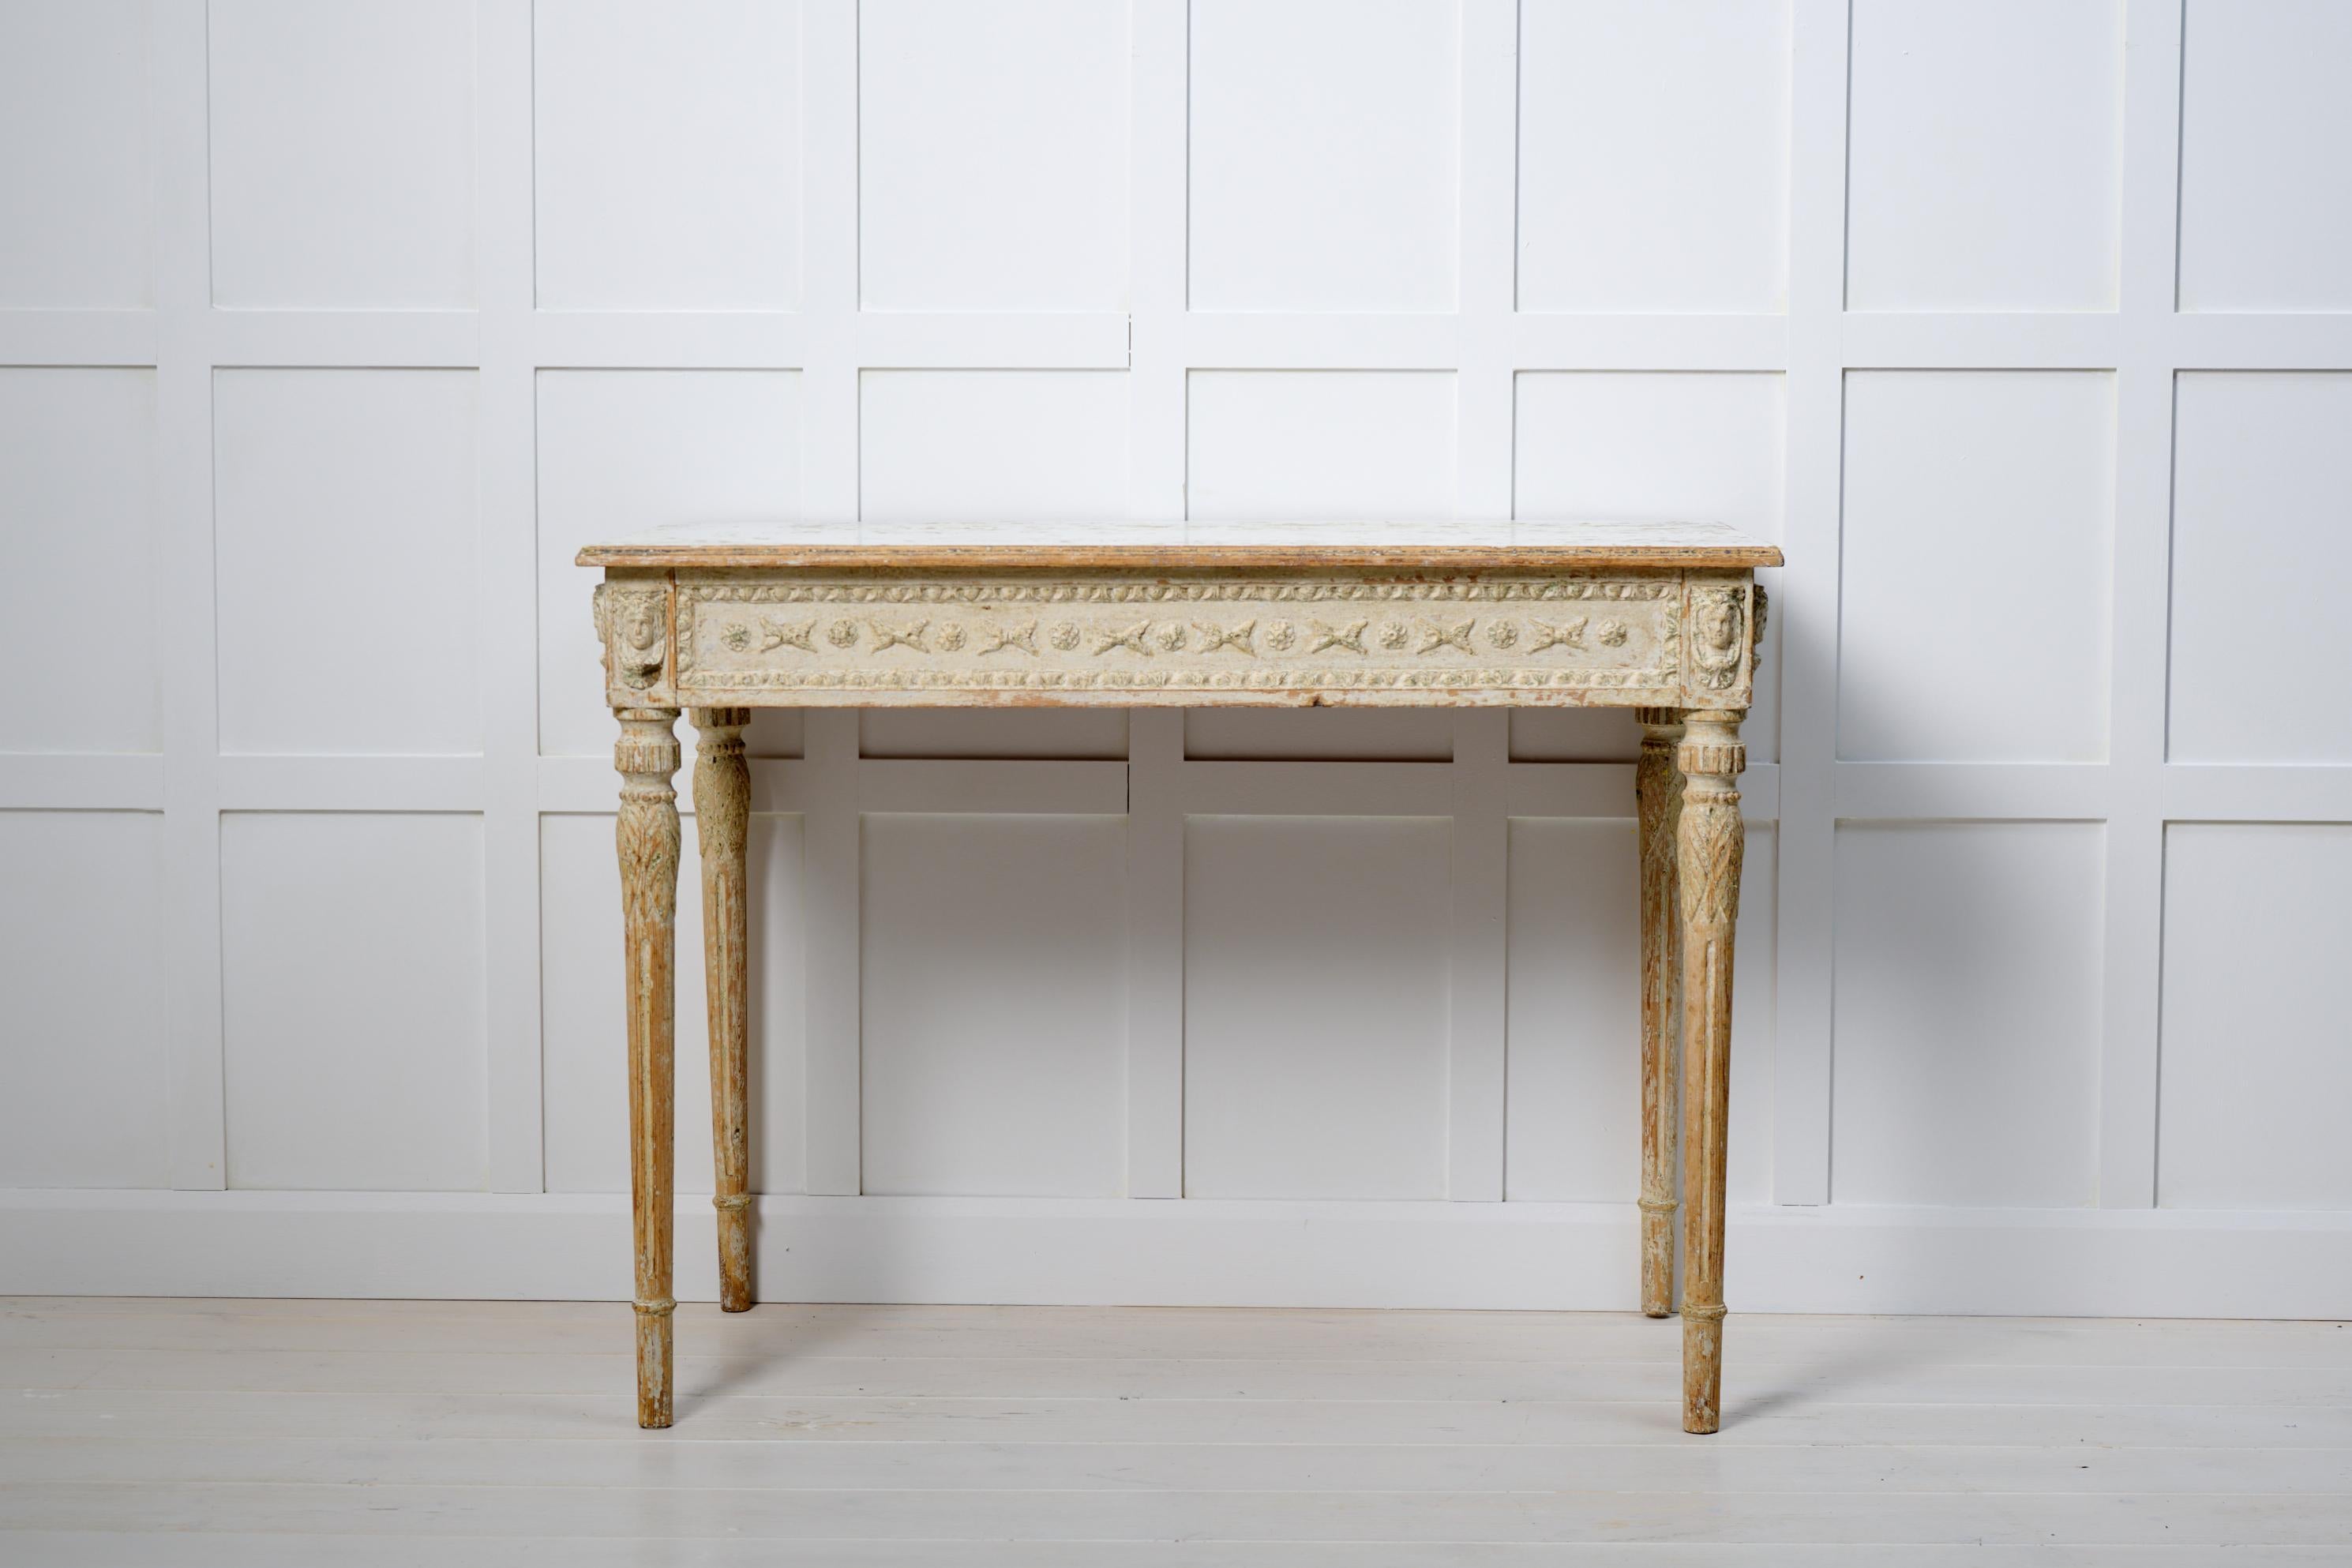 Swedish gustavian console table in painted pine. The table is made around 1790 to 1800 and has detailed carved wooden decor. The surface has been scraped by hand to the original paint which has created a rustic patina. The table is just over 200